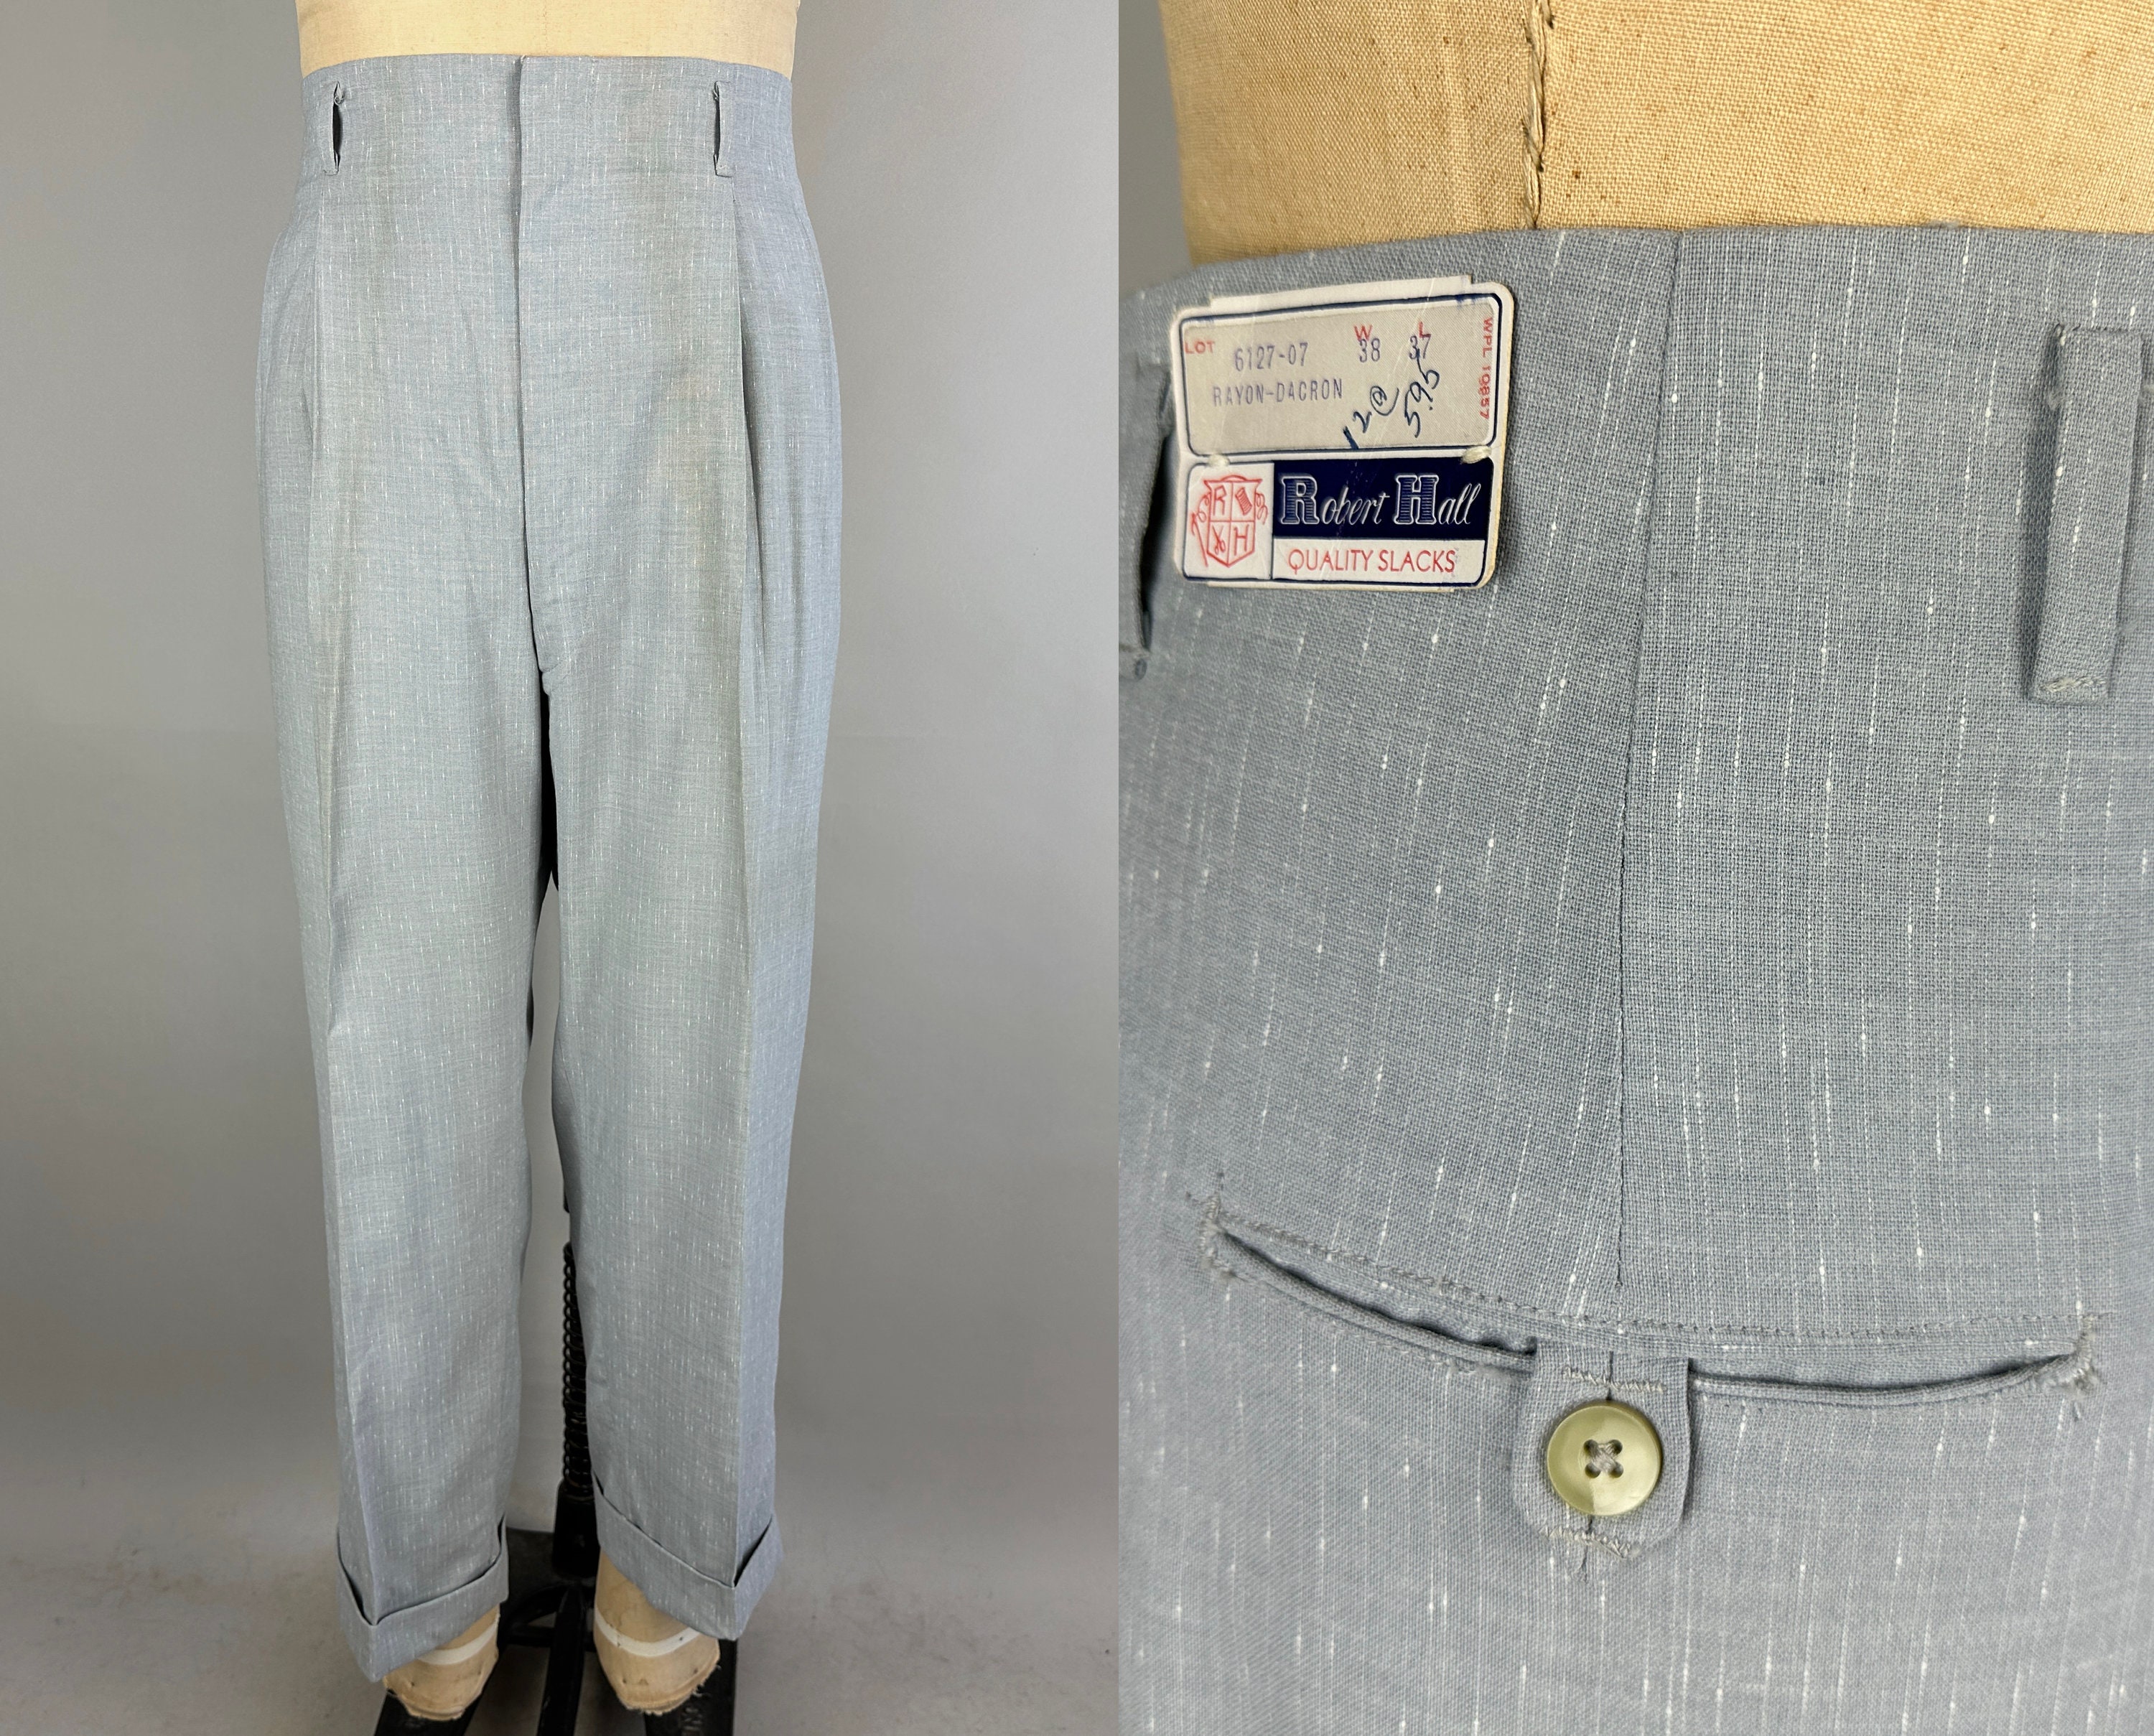 1950s Leading Man Trousers Vintage 50s NWT Deadstock Pleated Pants Slacks  in White Flecked Grey W/hollywood Waist 38x264 Extra Large XL -  Canada